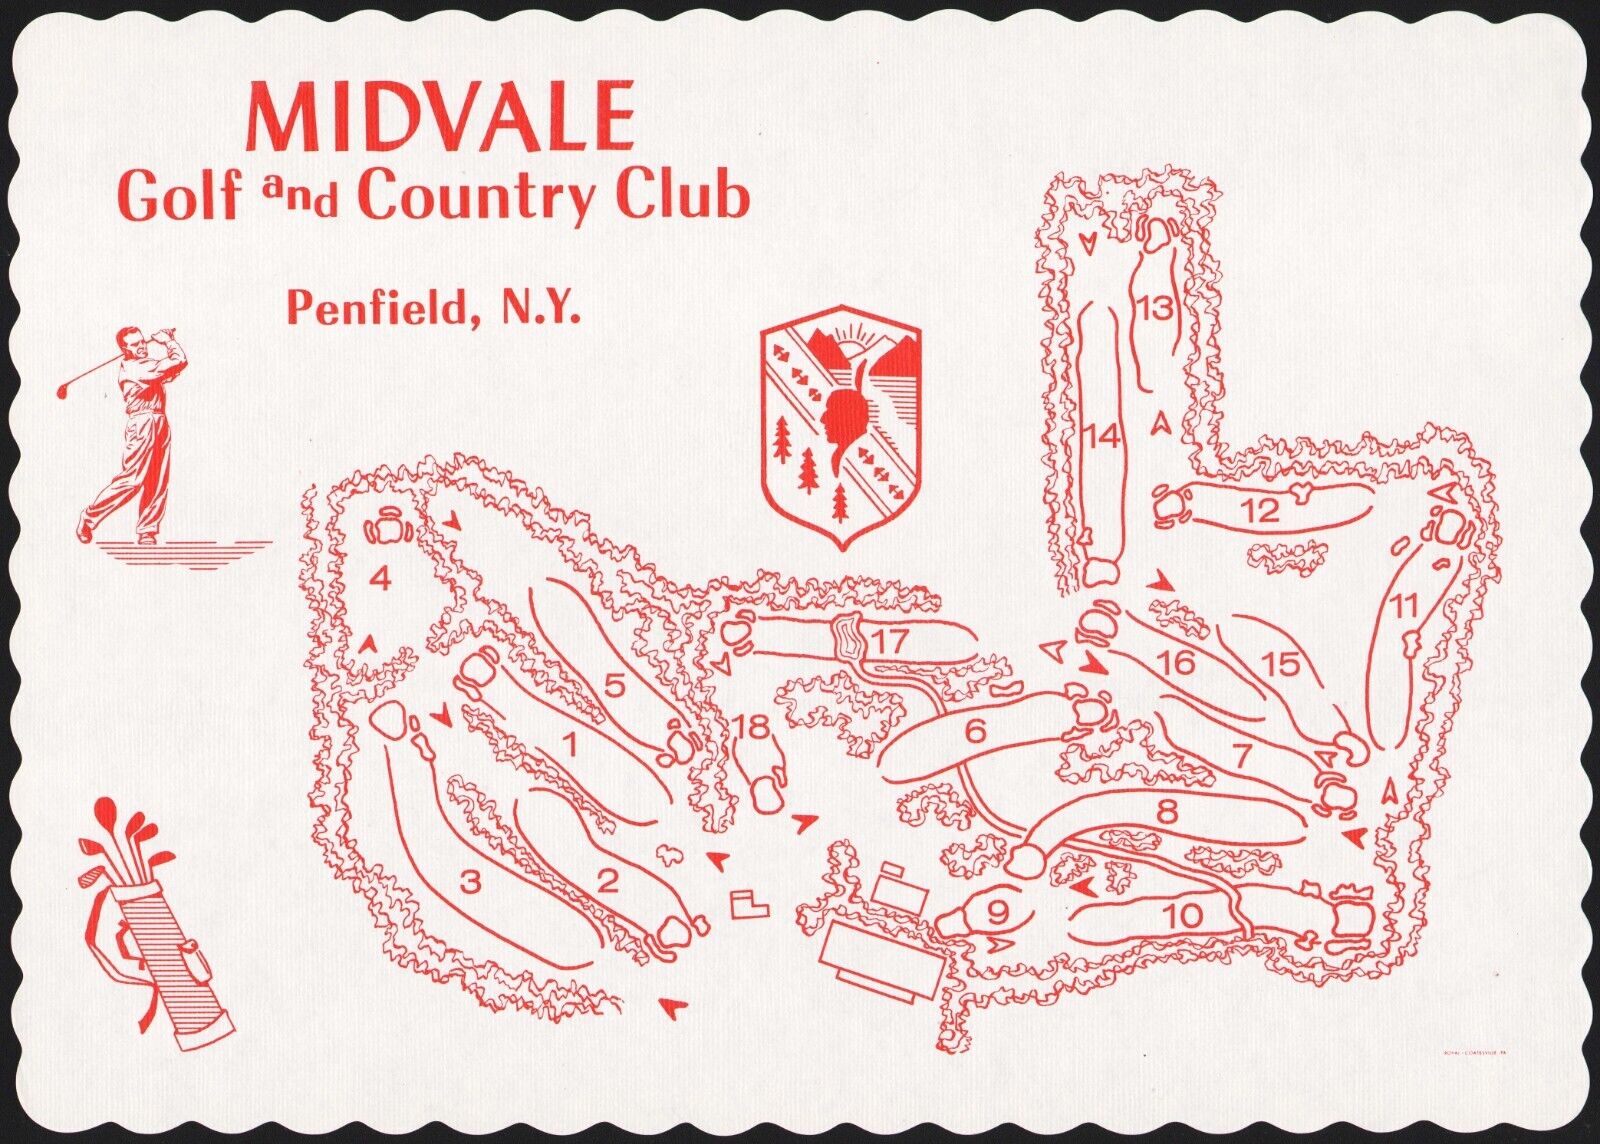 Vintage placemat MIDVALE GOLF and COUNTRY CLUB indian logo Pennfield New York